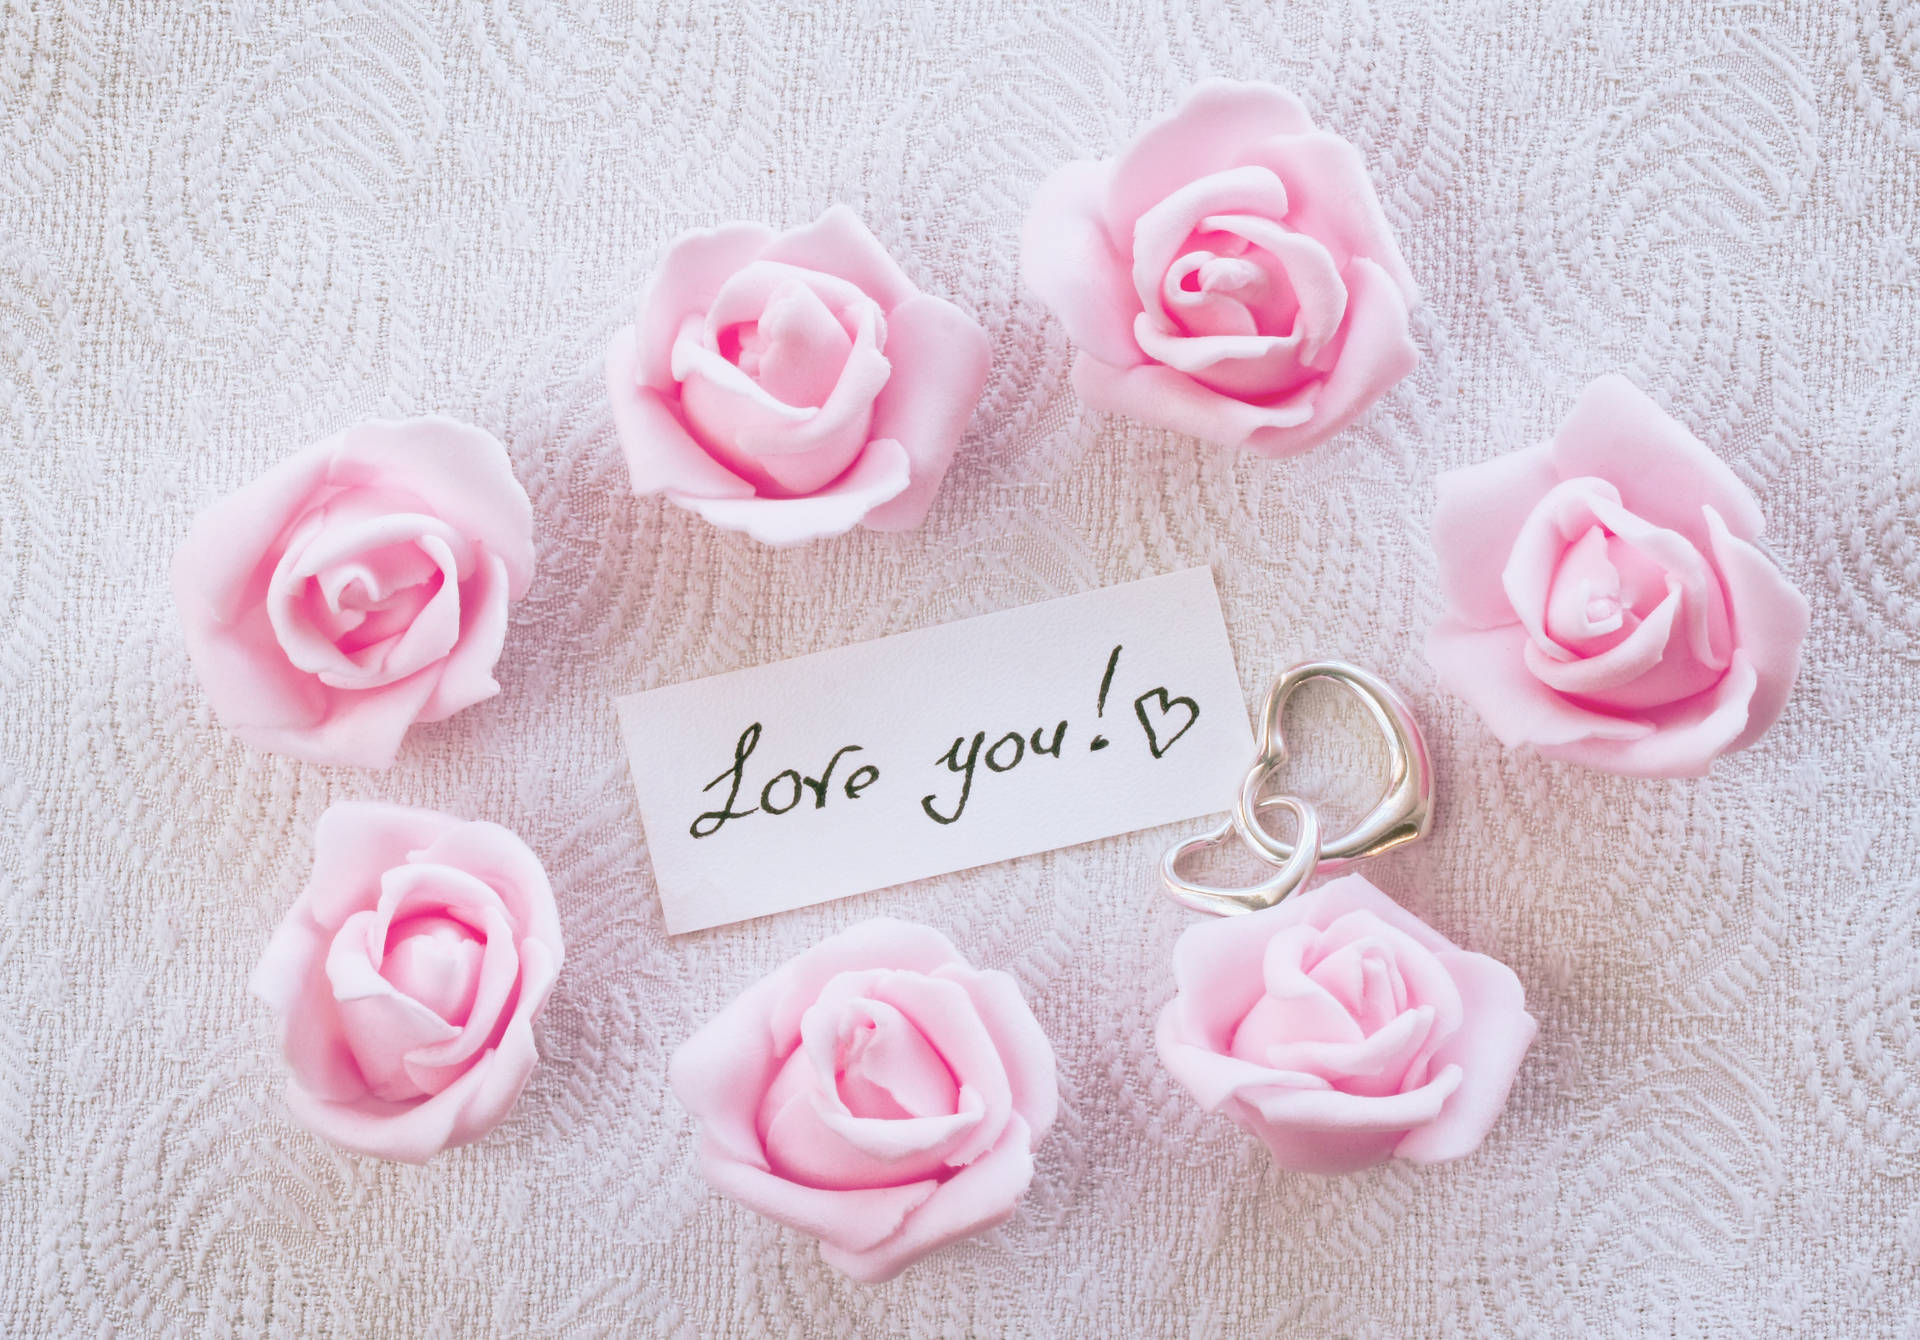 A Bloom Of Love: Romantic Rose Background